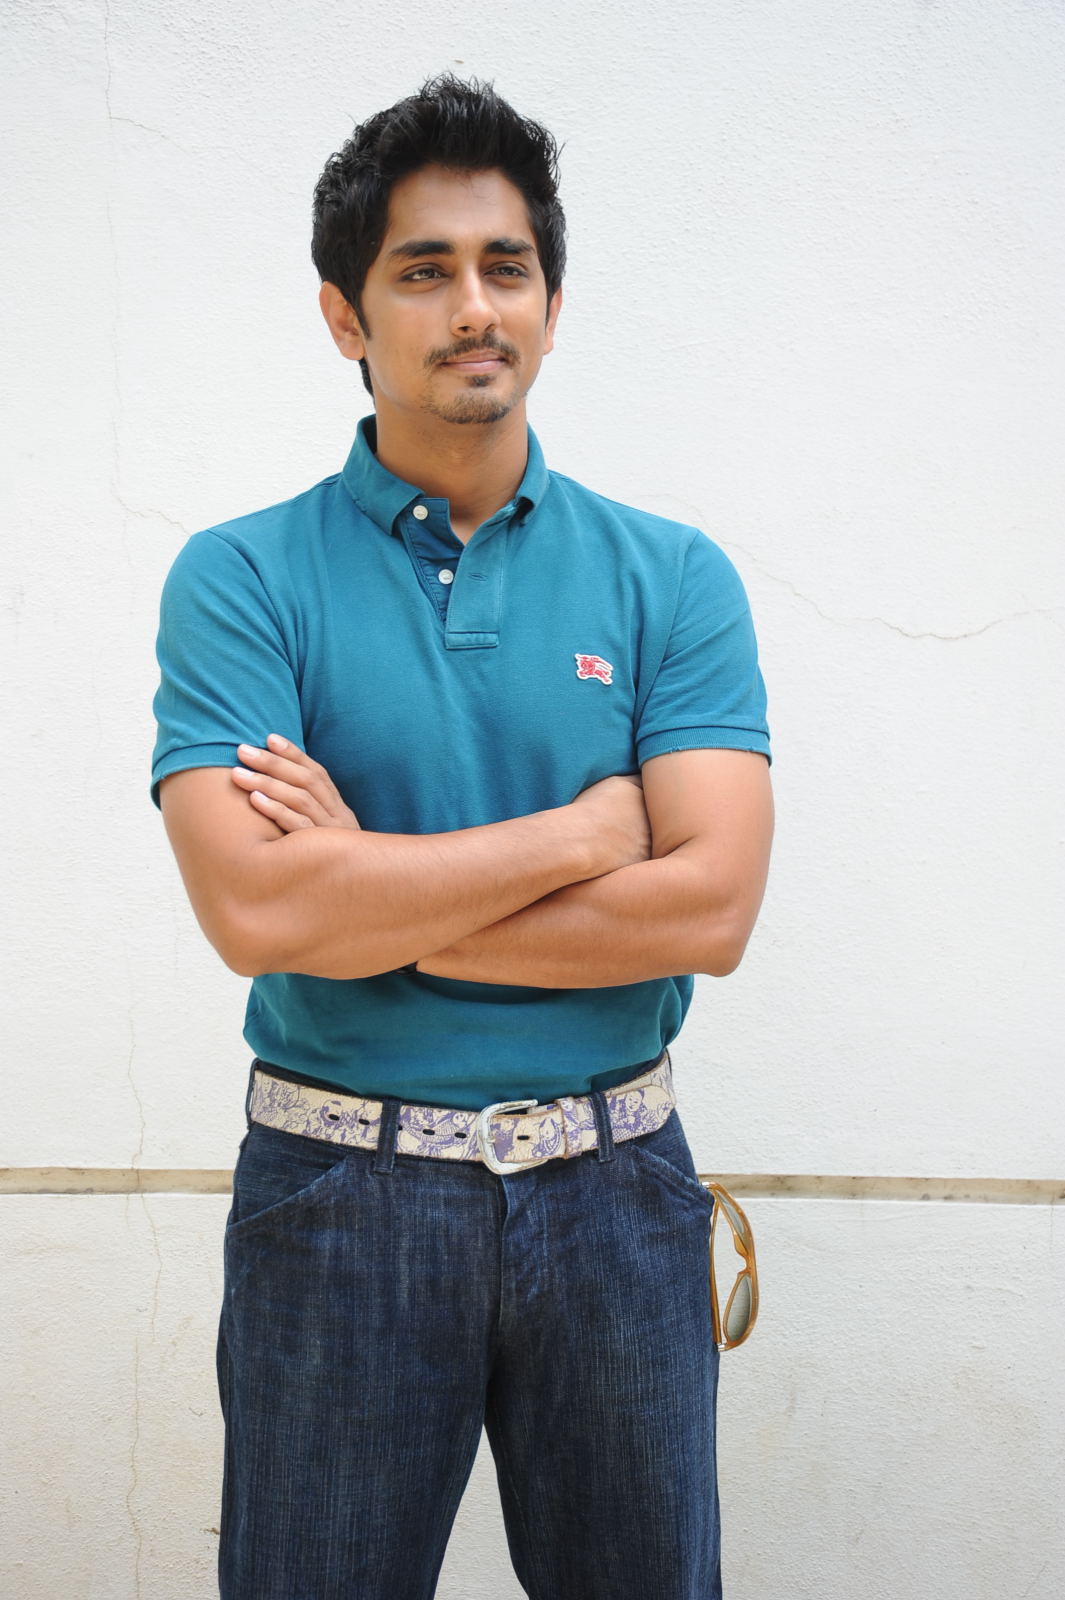 siddharth photos | Picture 41459